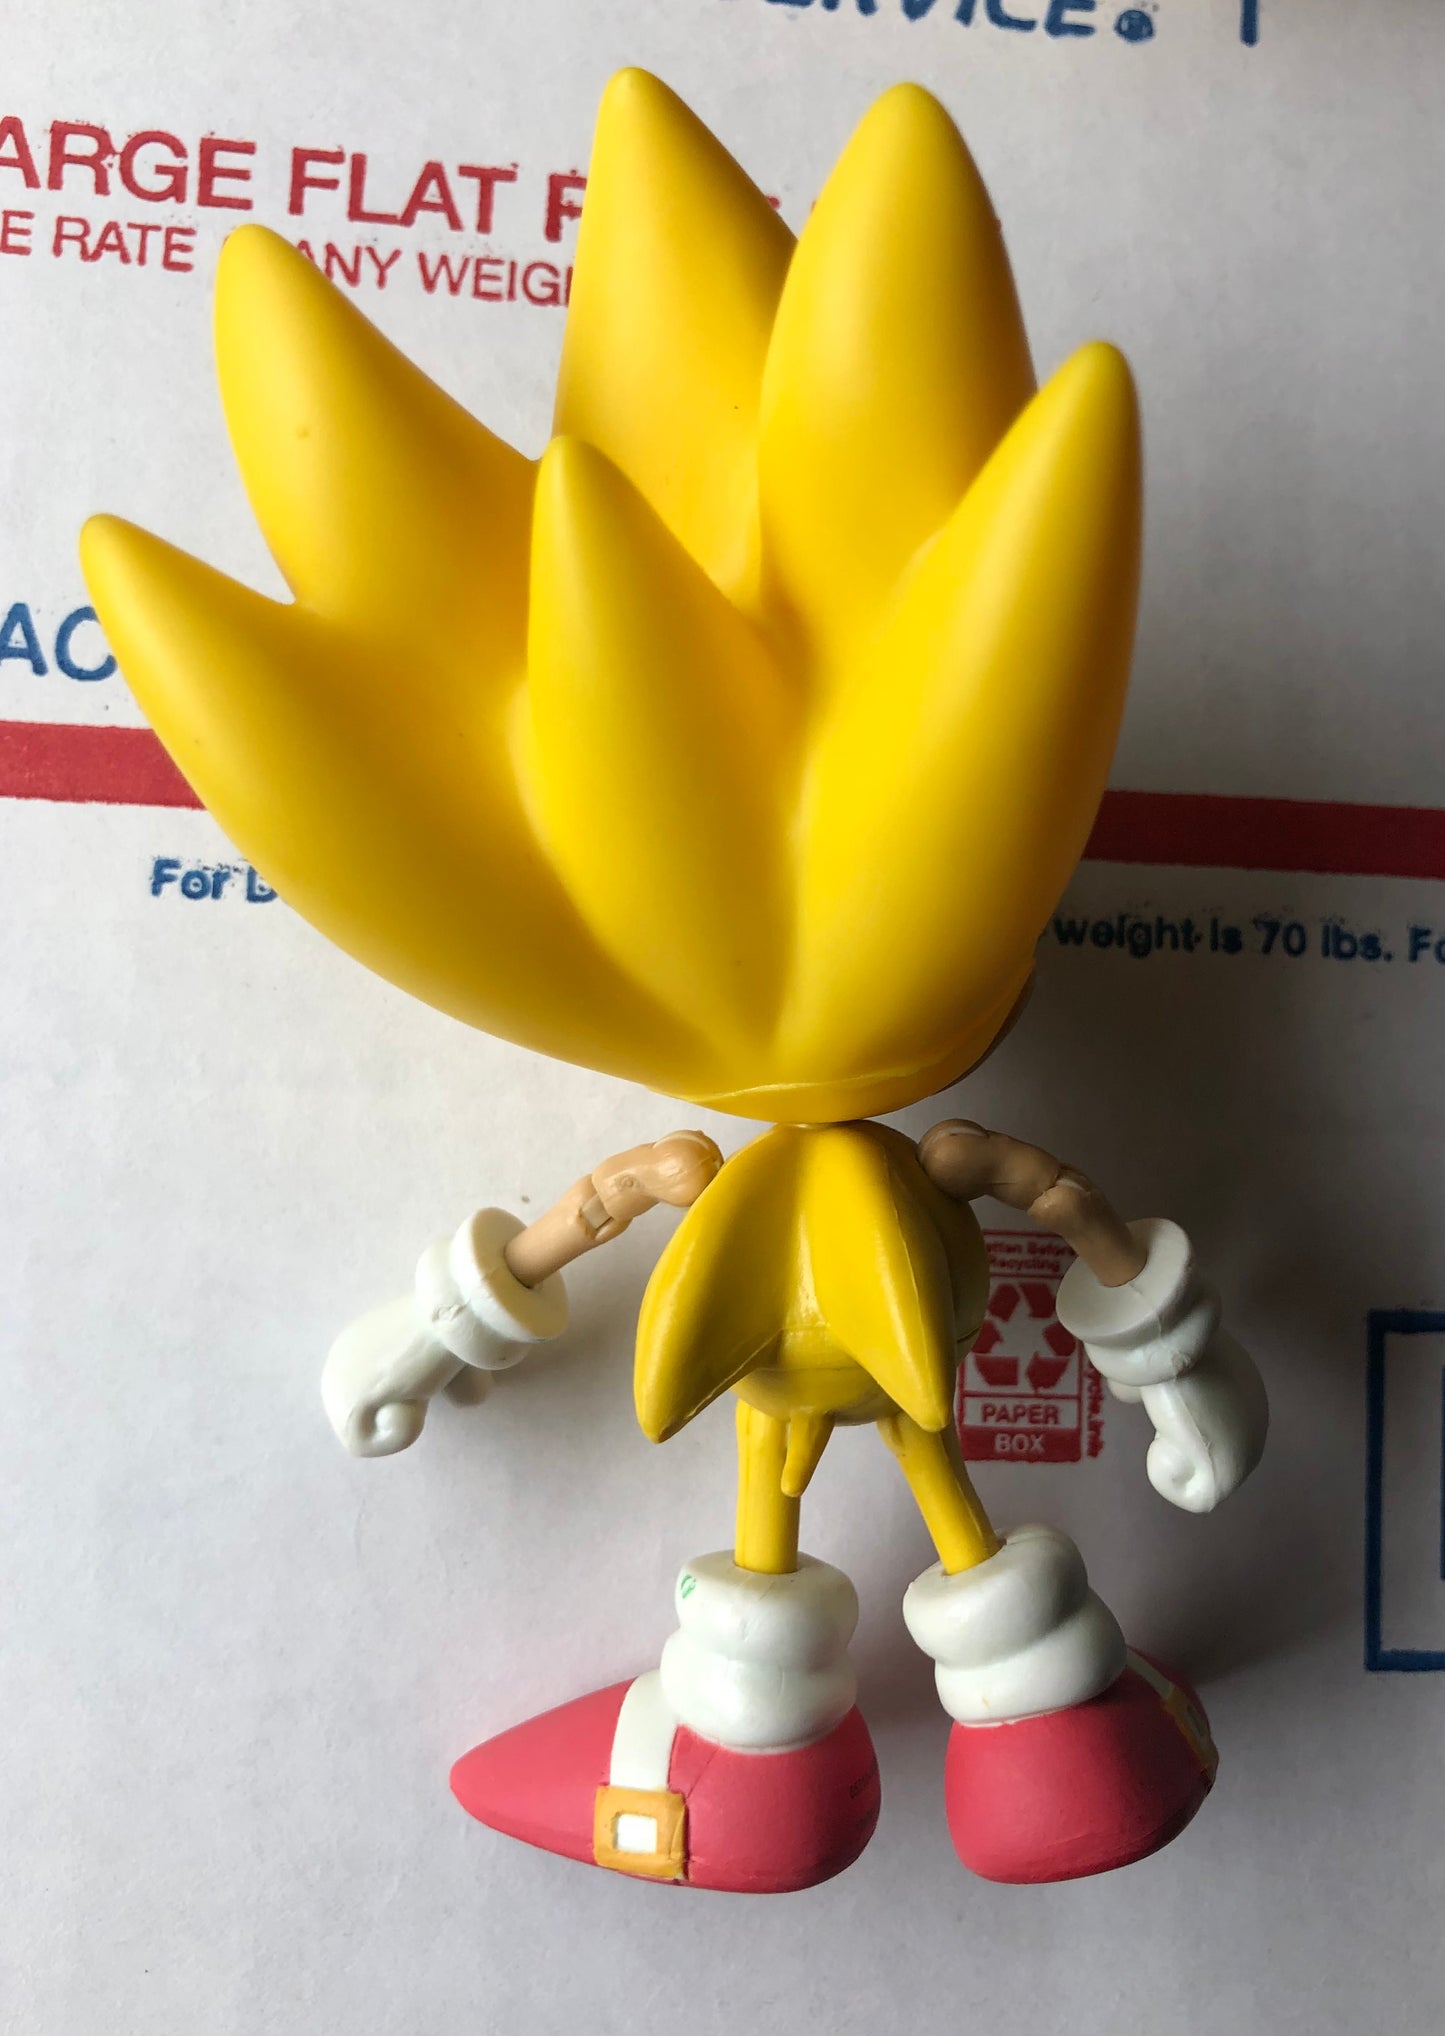 Jazwares 5" Inch Classic Super Sonic Action Figure (Used)